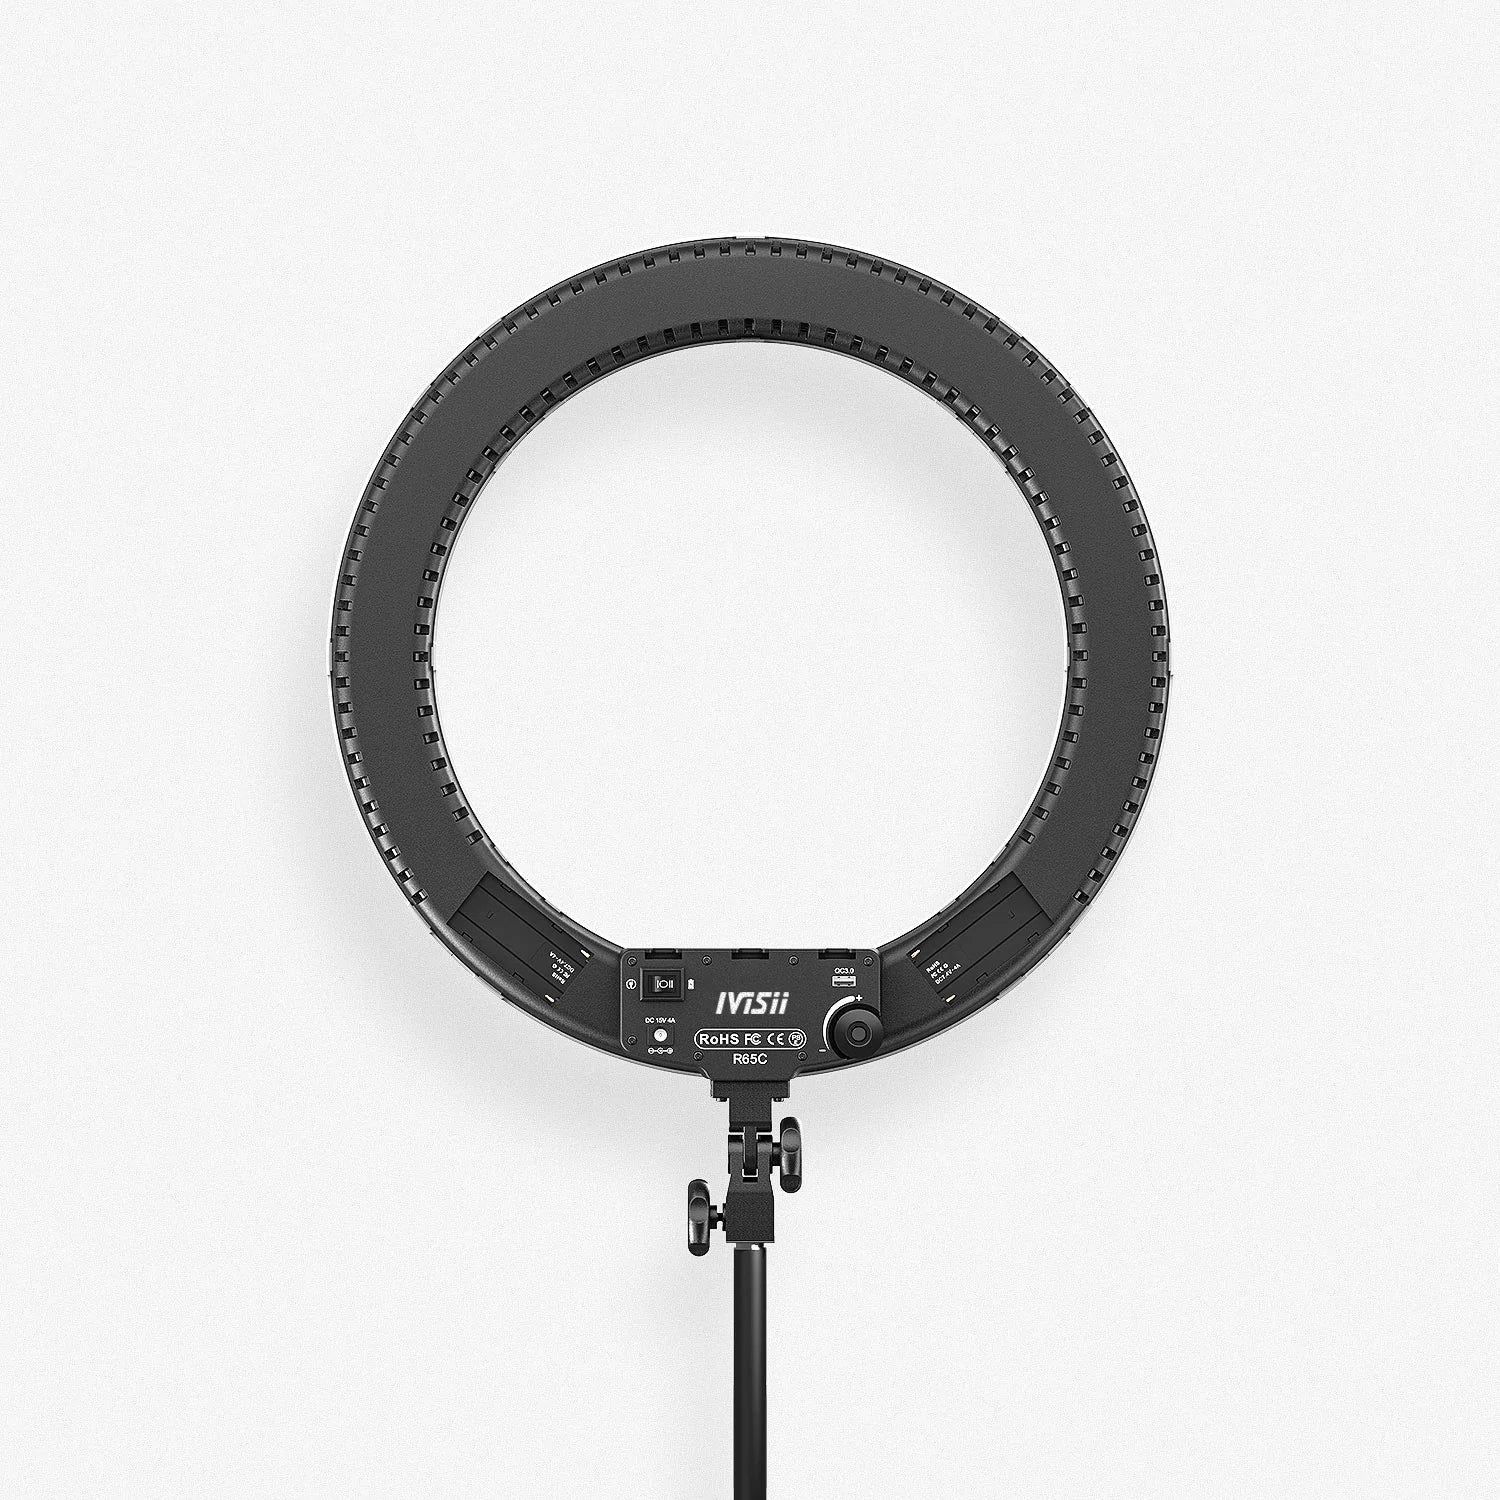 IVISII 19 inch Ring Light R65C with Stand and Phone Holder